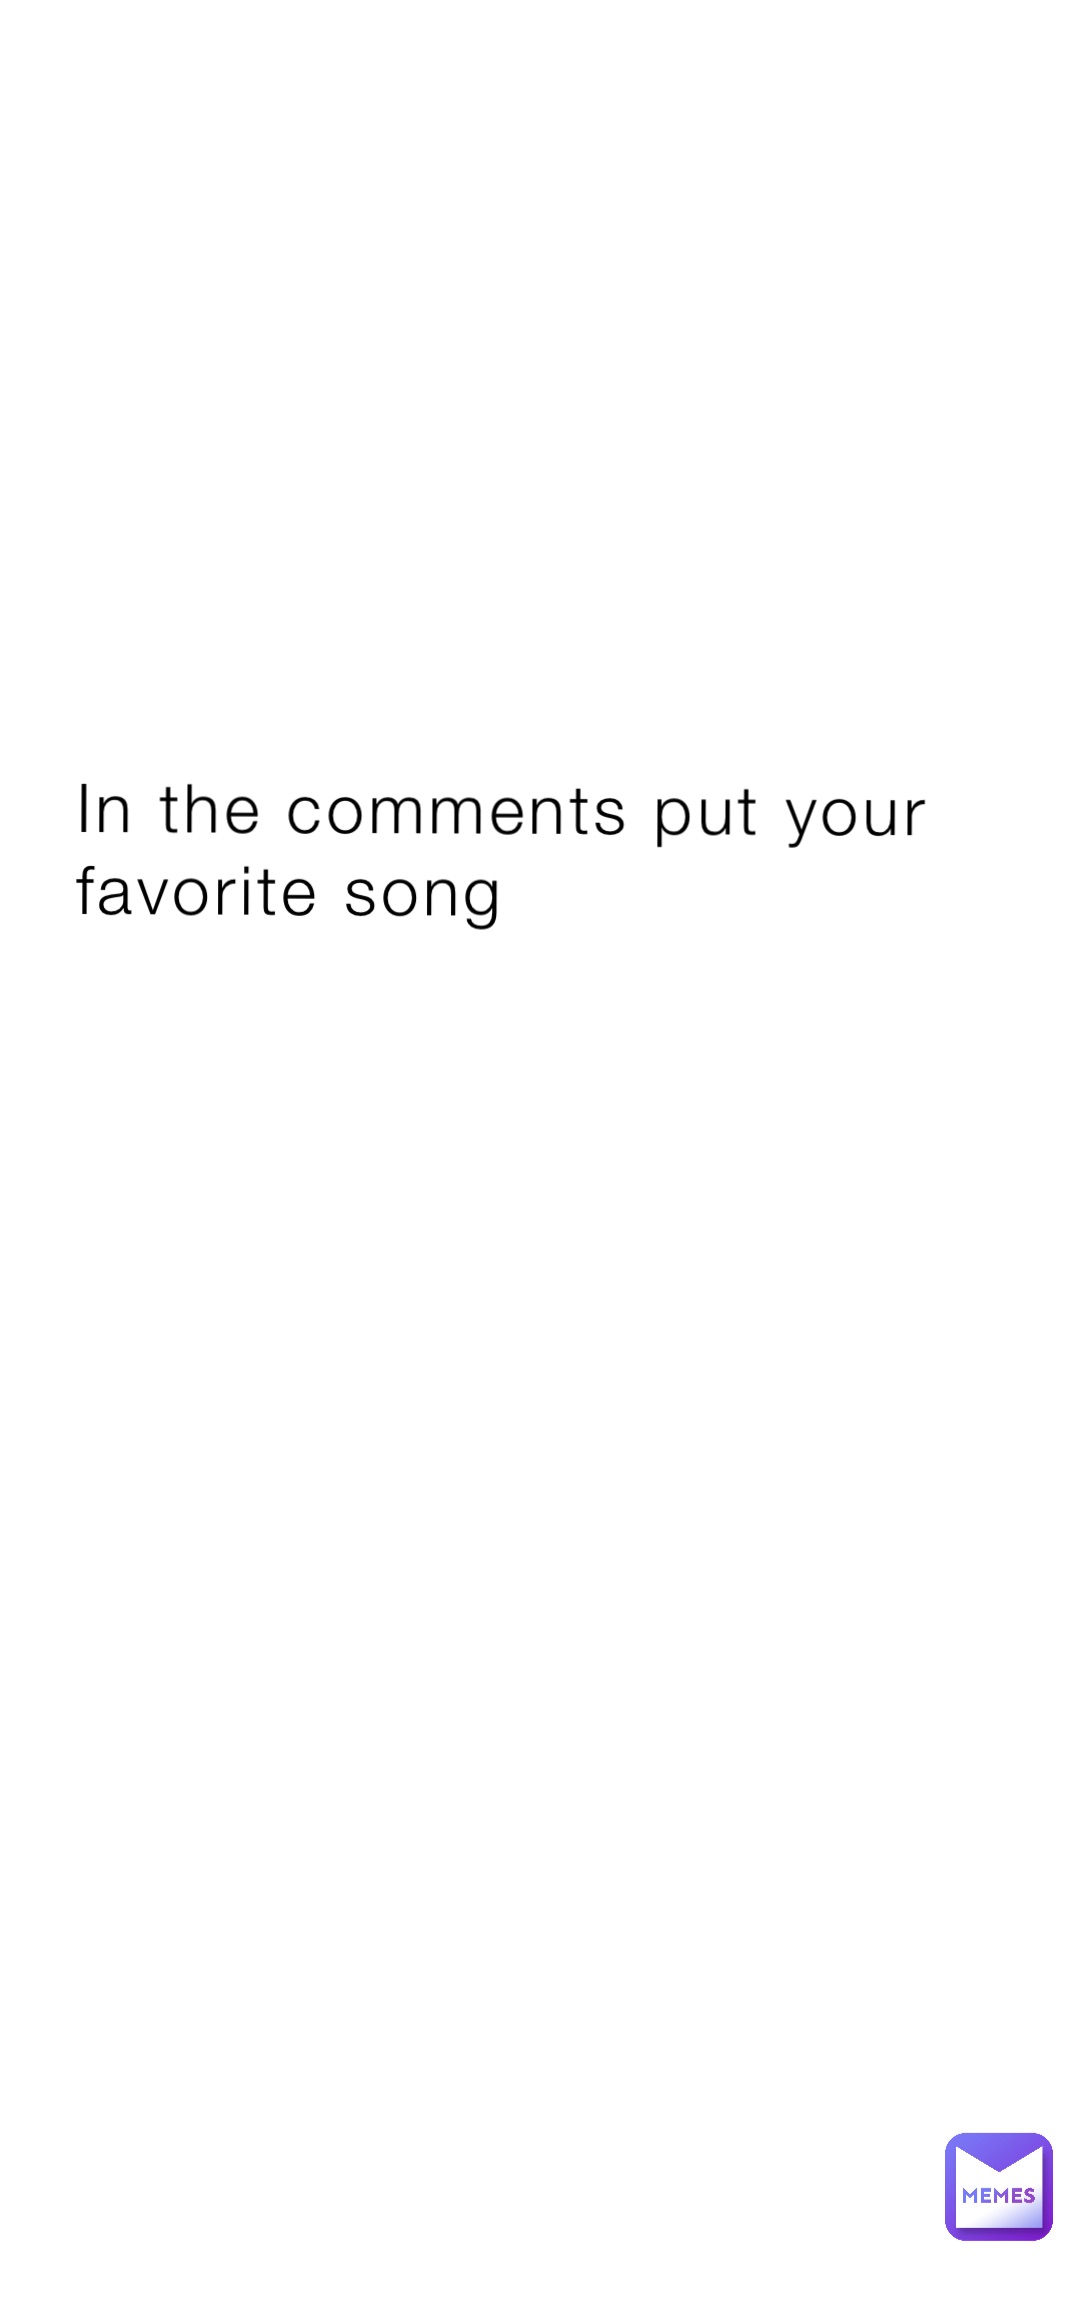 In the comments put your favorite song